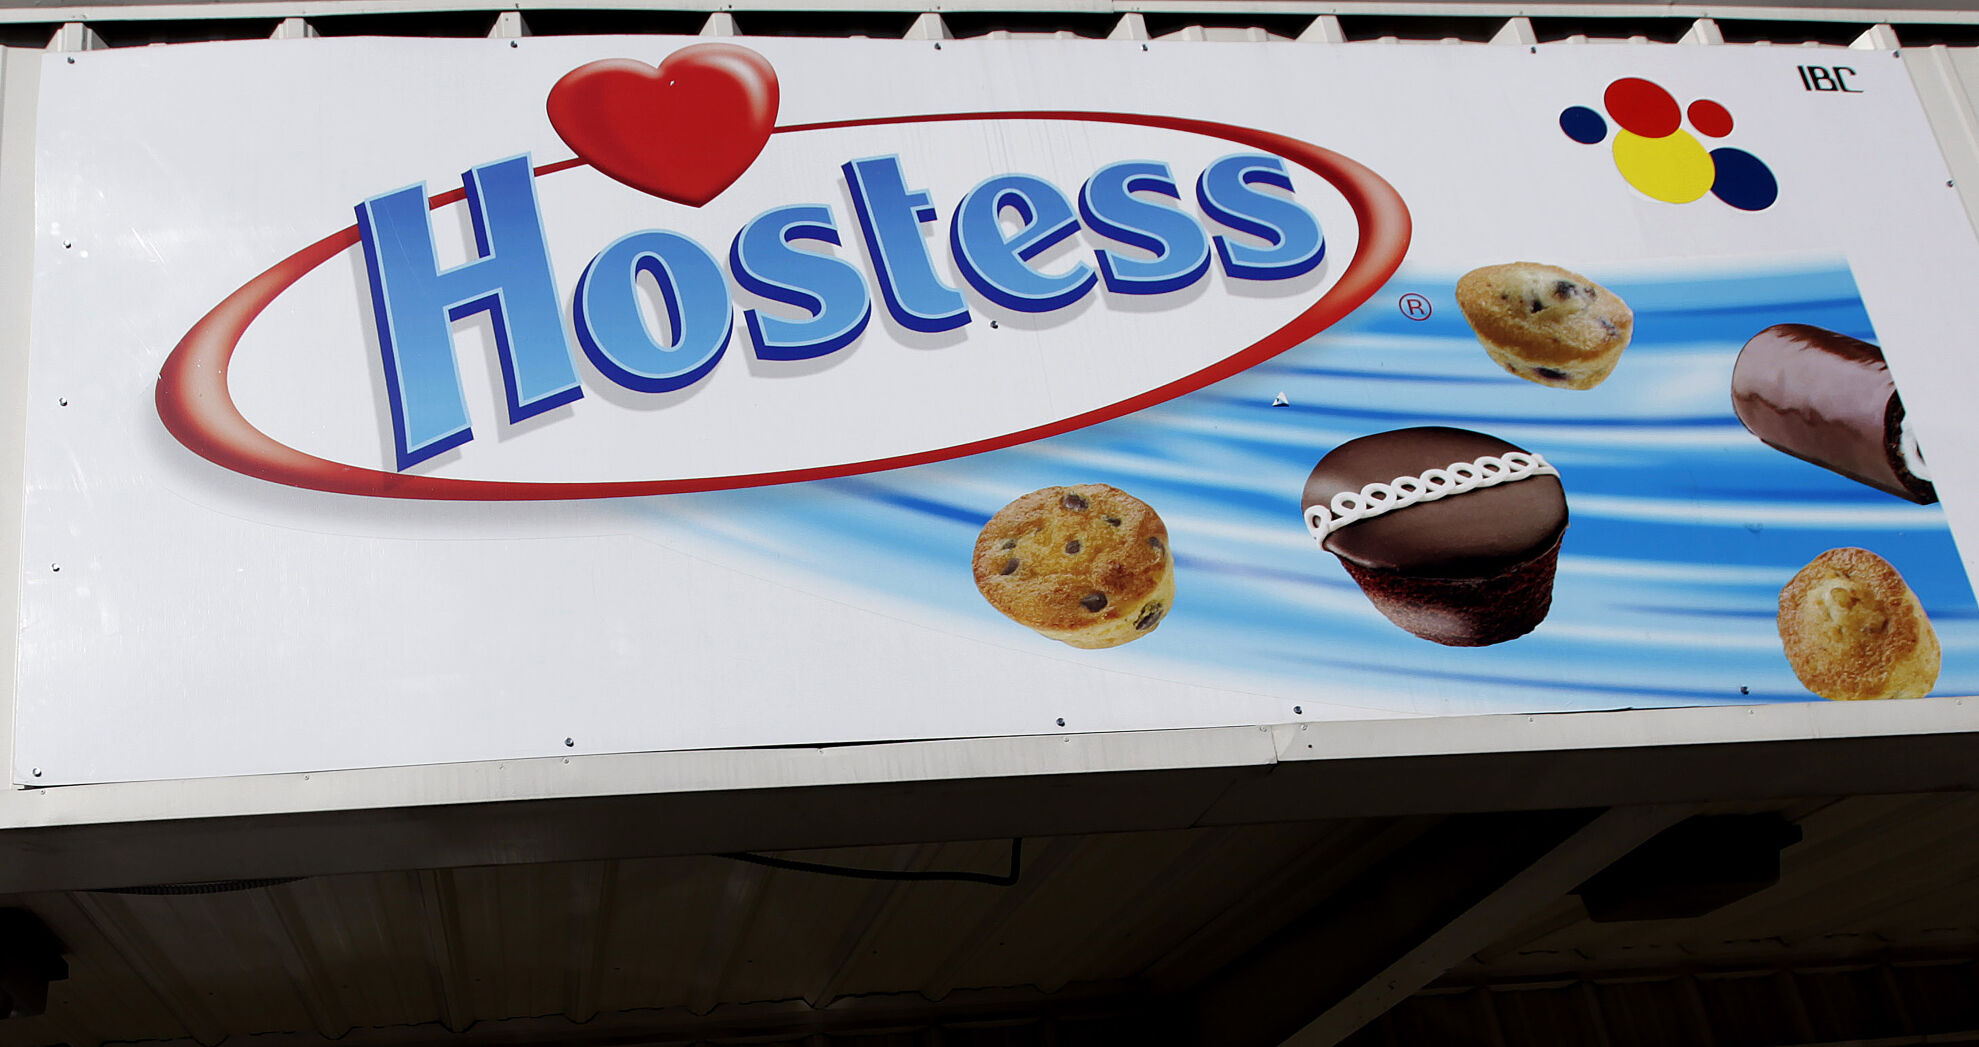 <p>FILE - A Hostess sign is shown on a closed retail outlet store in Garland, Texas, Jan. 11, 2012. Hostess, the maker of snack classics like Twinkies and HoHos, is being sold to J.M. Smucker in a cash-and-stock deal worth about $5.6 billion. Smucker, which makes everything from coffee to peanut butter and jelly, will pay $34.25 per share in cash and stock, and it will also pick up approximately $900 million in net debt. (AP Photo/LM Otero, file)</p>   PHOTO CREDIT: LM Otero 